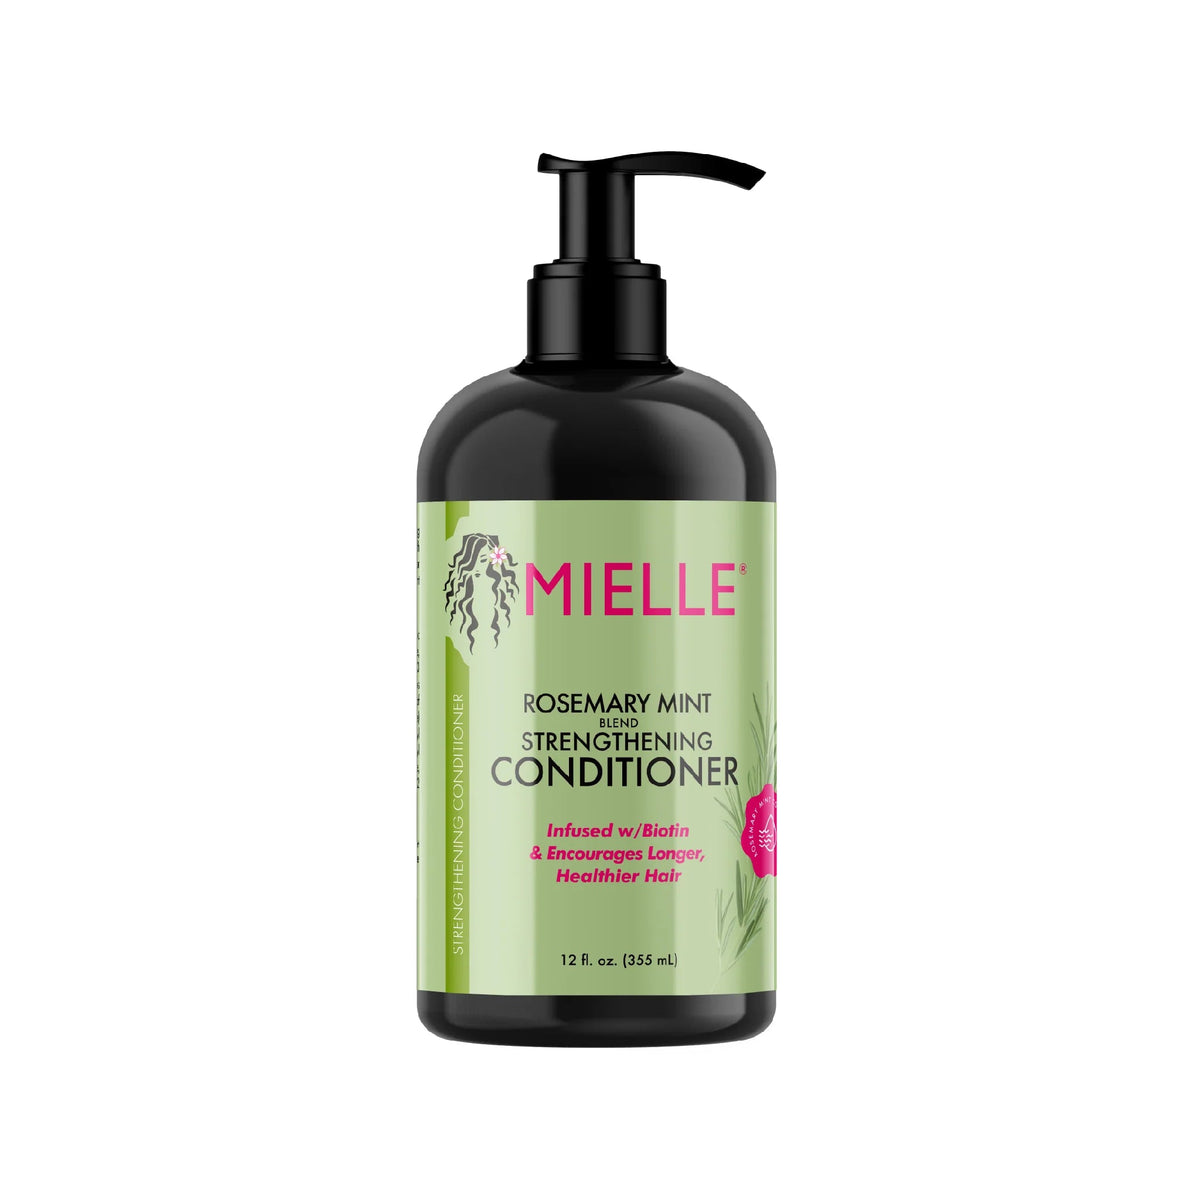 Mielle Organics Rosemary Mint Strengthening Conditioner with Biotin 355ml